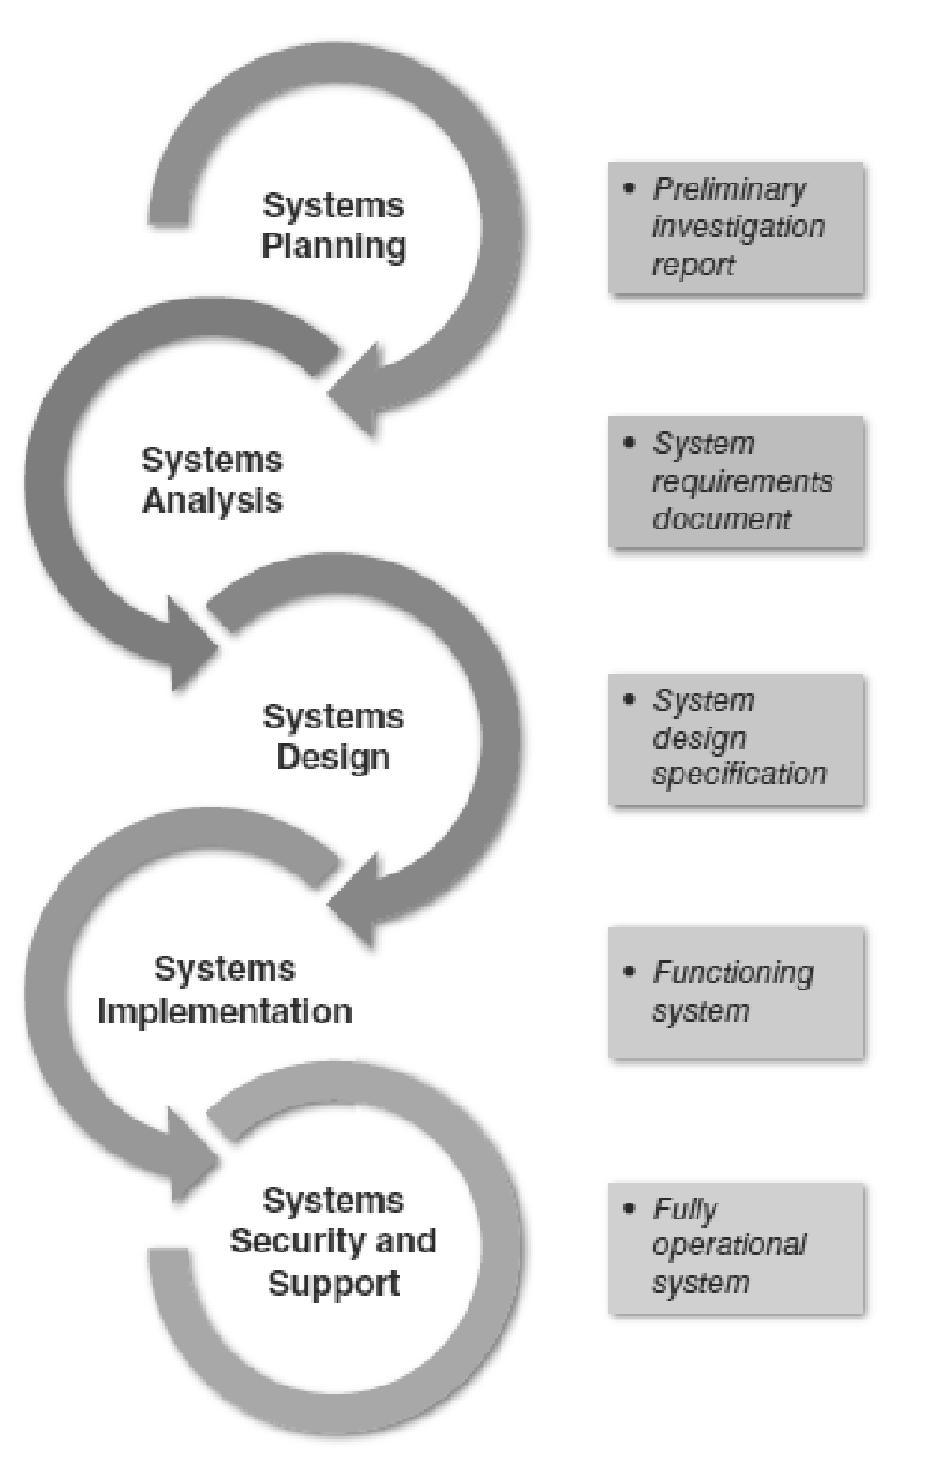 The SDLC model usually includes five steps Systems Planning Systems Analysis Systems Design Systems Implementation Systems Security and Support